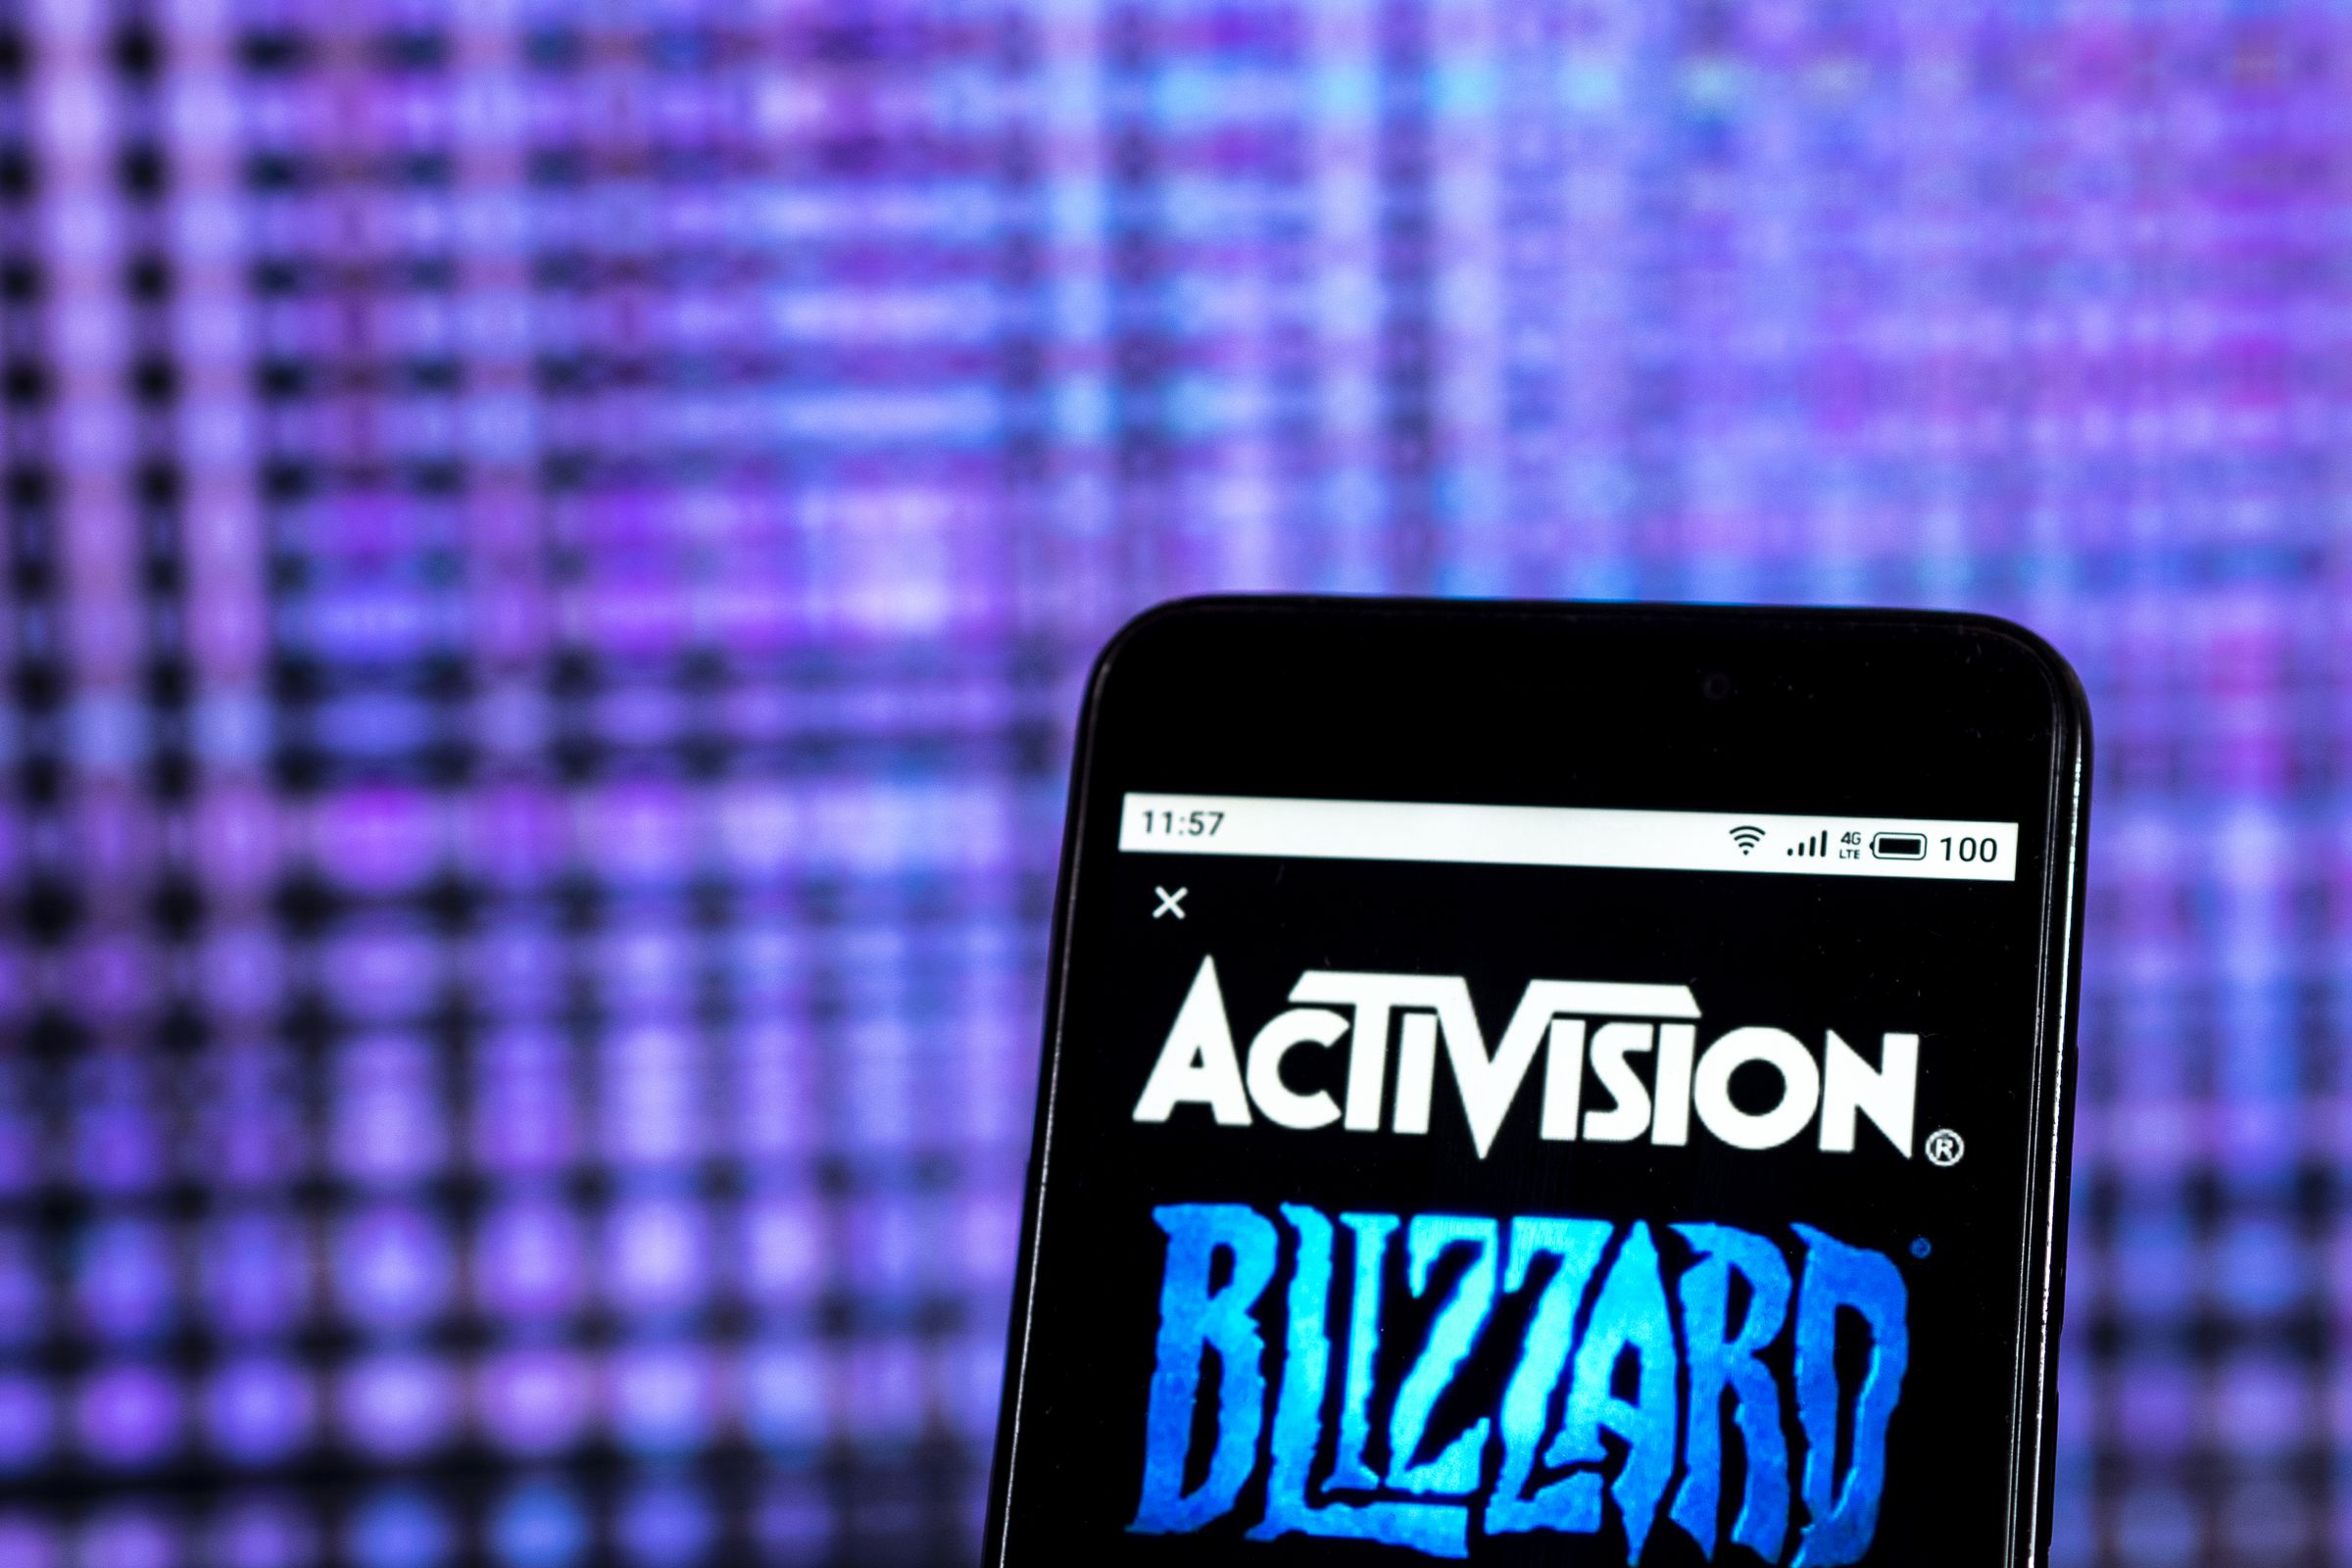 Activision Blizzard Video game company logo seen displayed